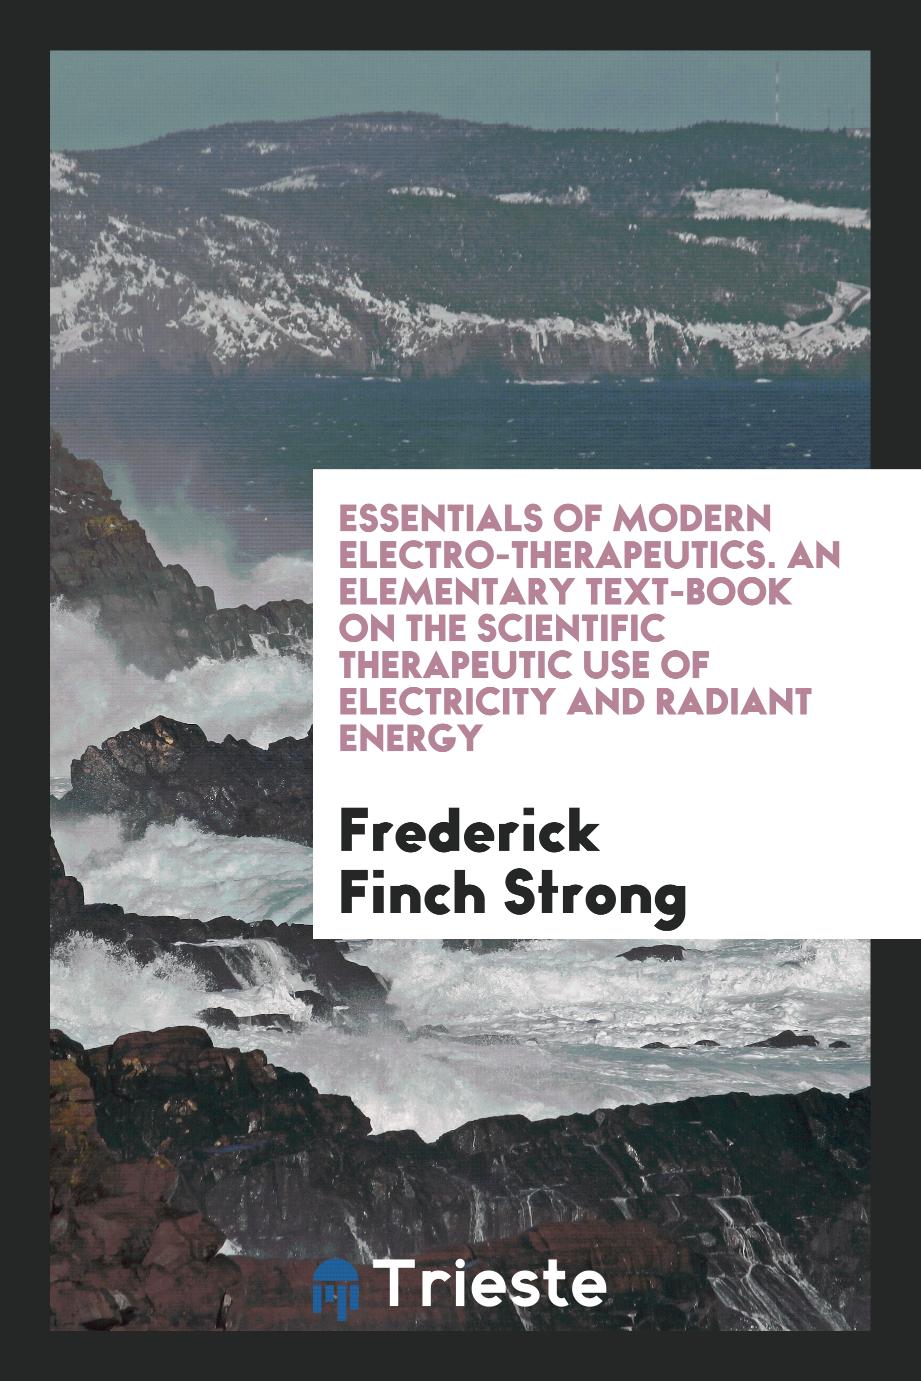 Essentials of Modern Electro-Therapeutics. An Elementary Text-Book on the Scientific Therapeutic Use of Electricity and Radiant Energy